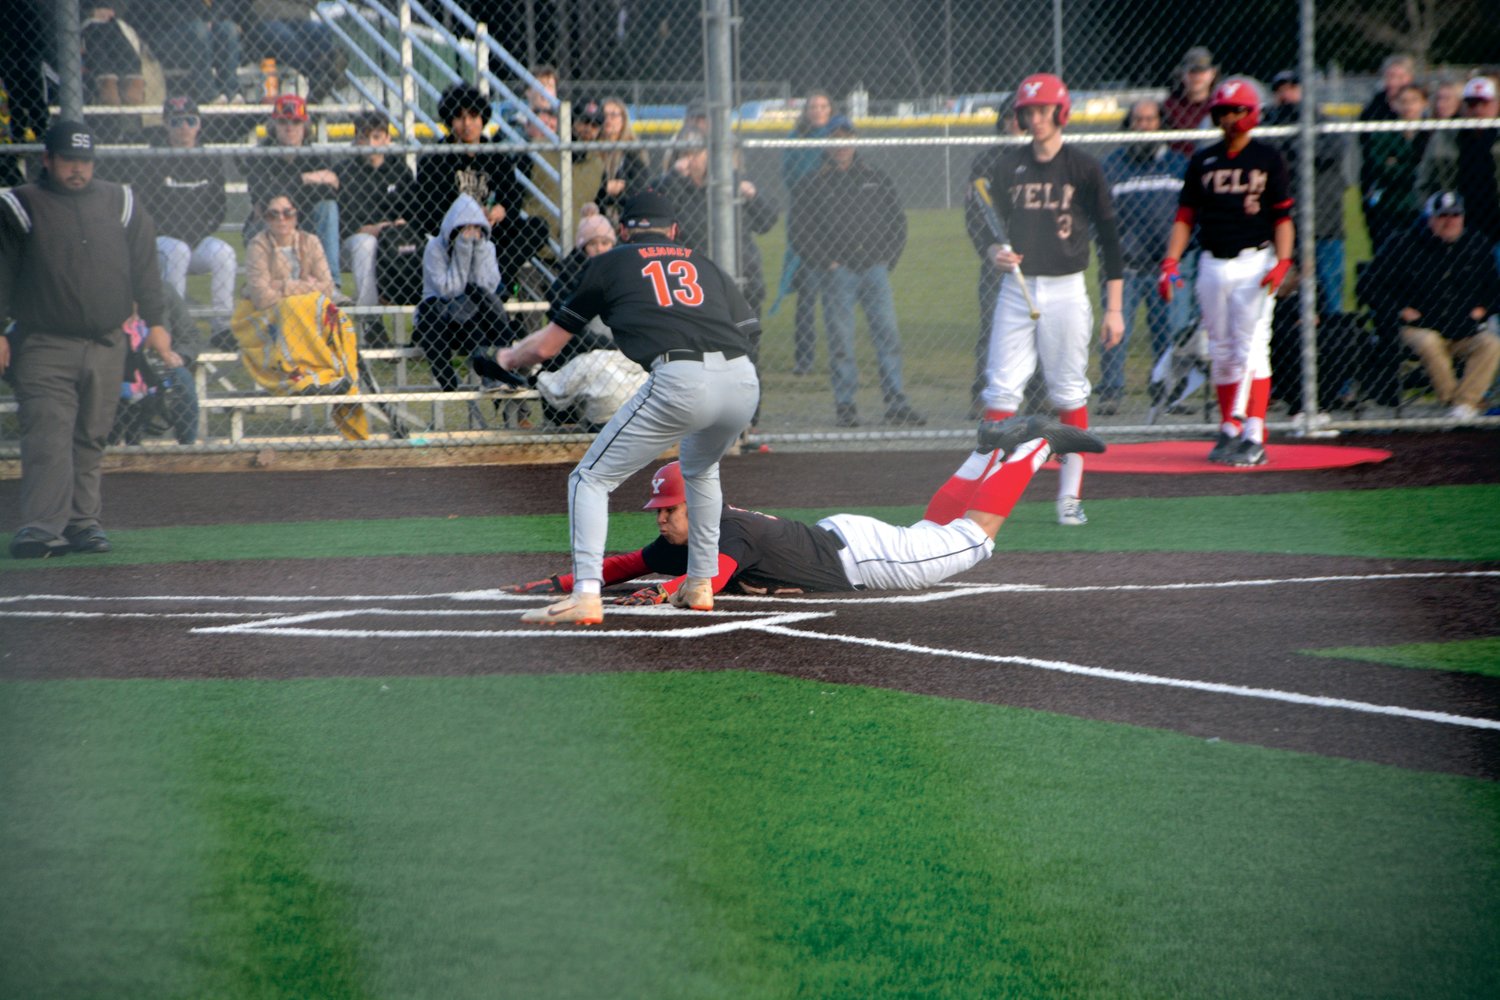 Junior Aaron Youckton, of Yelm,  slides head first into home plate in a game against Rainier on Friday, March 10.